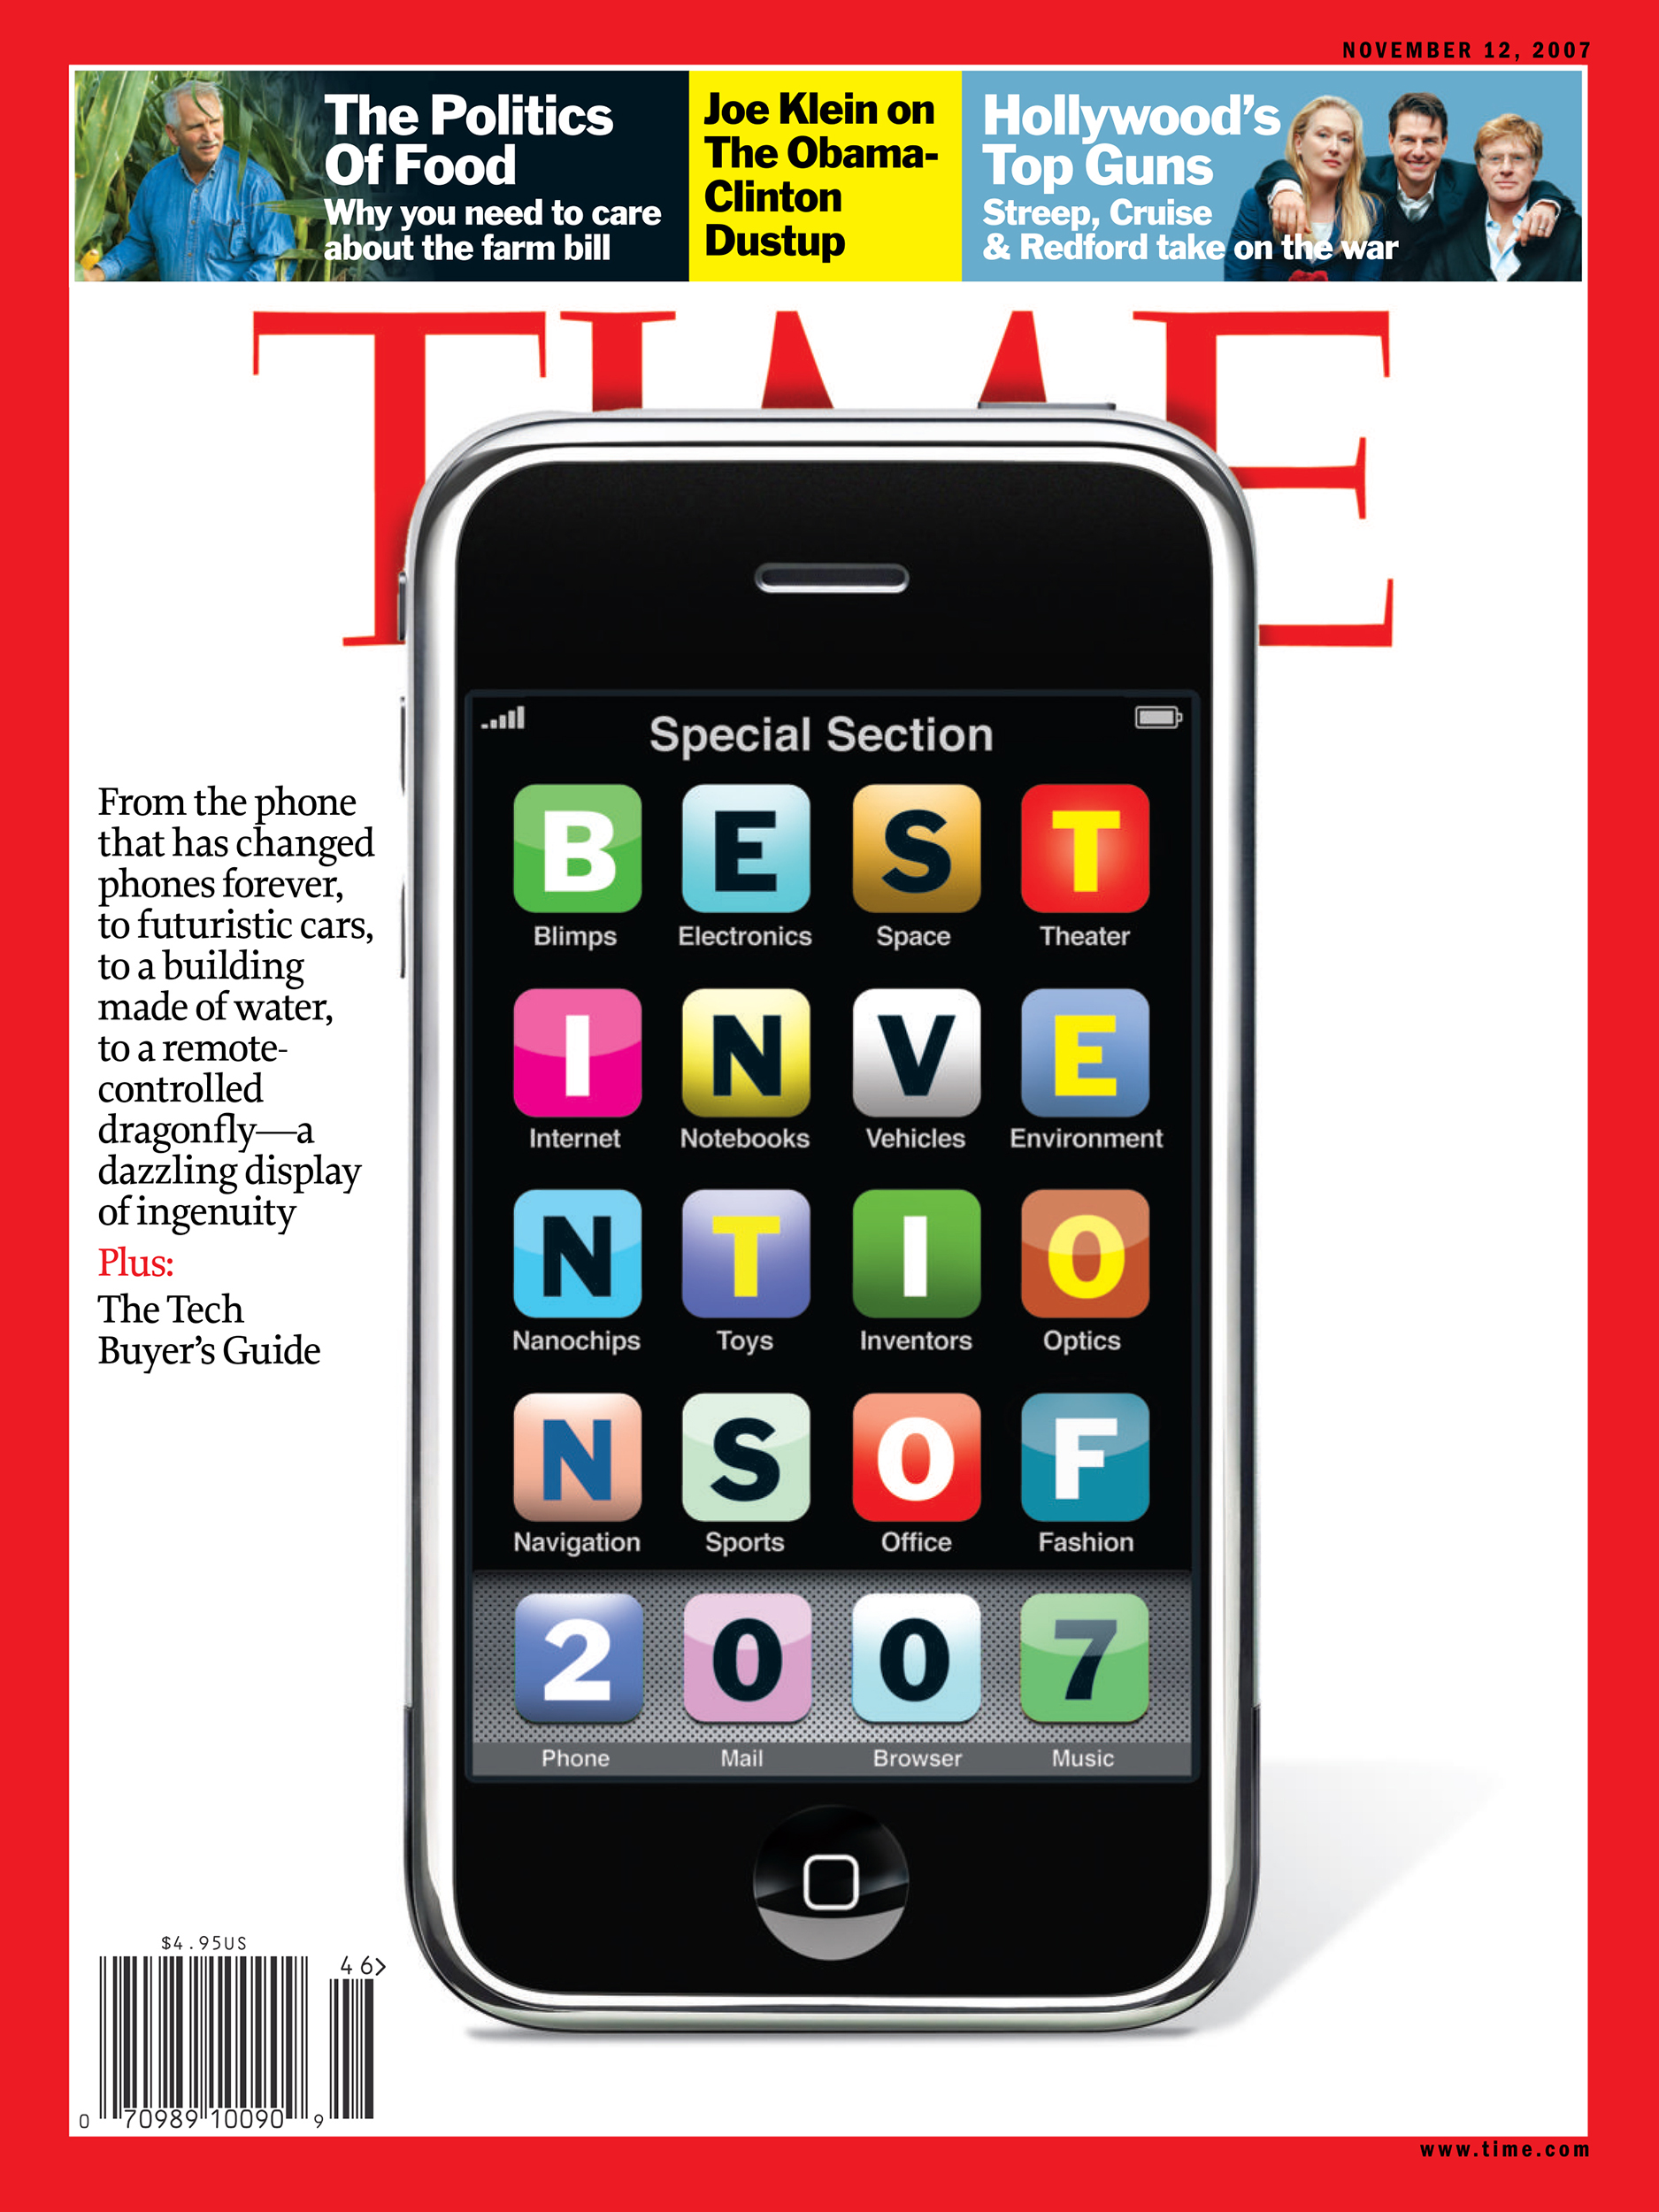 The Nov. 12, 2007 cover of TIME